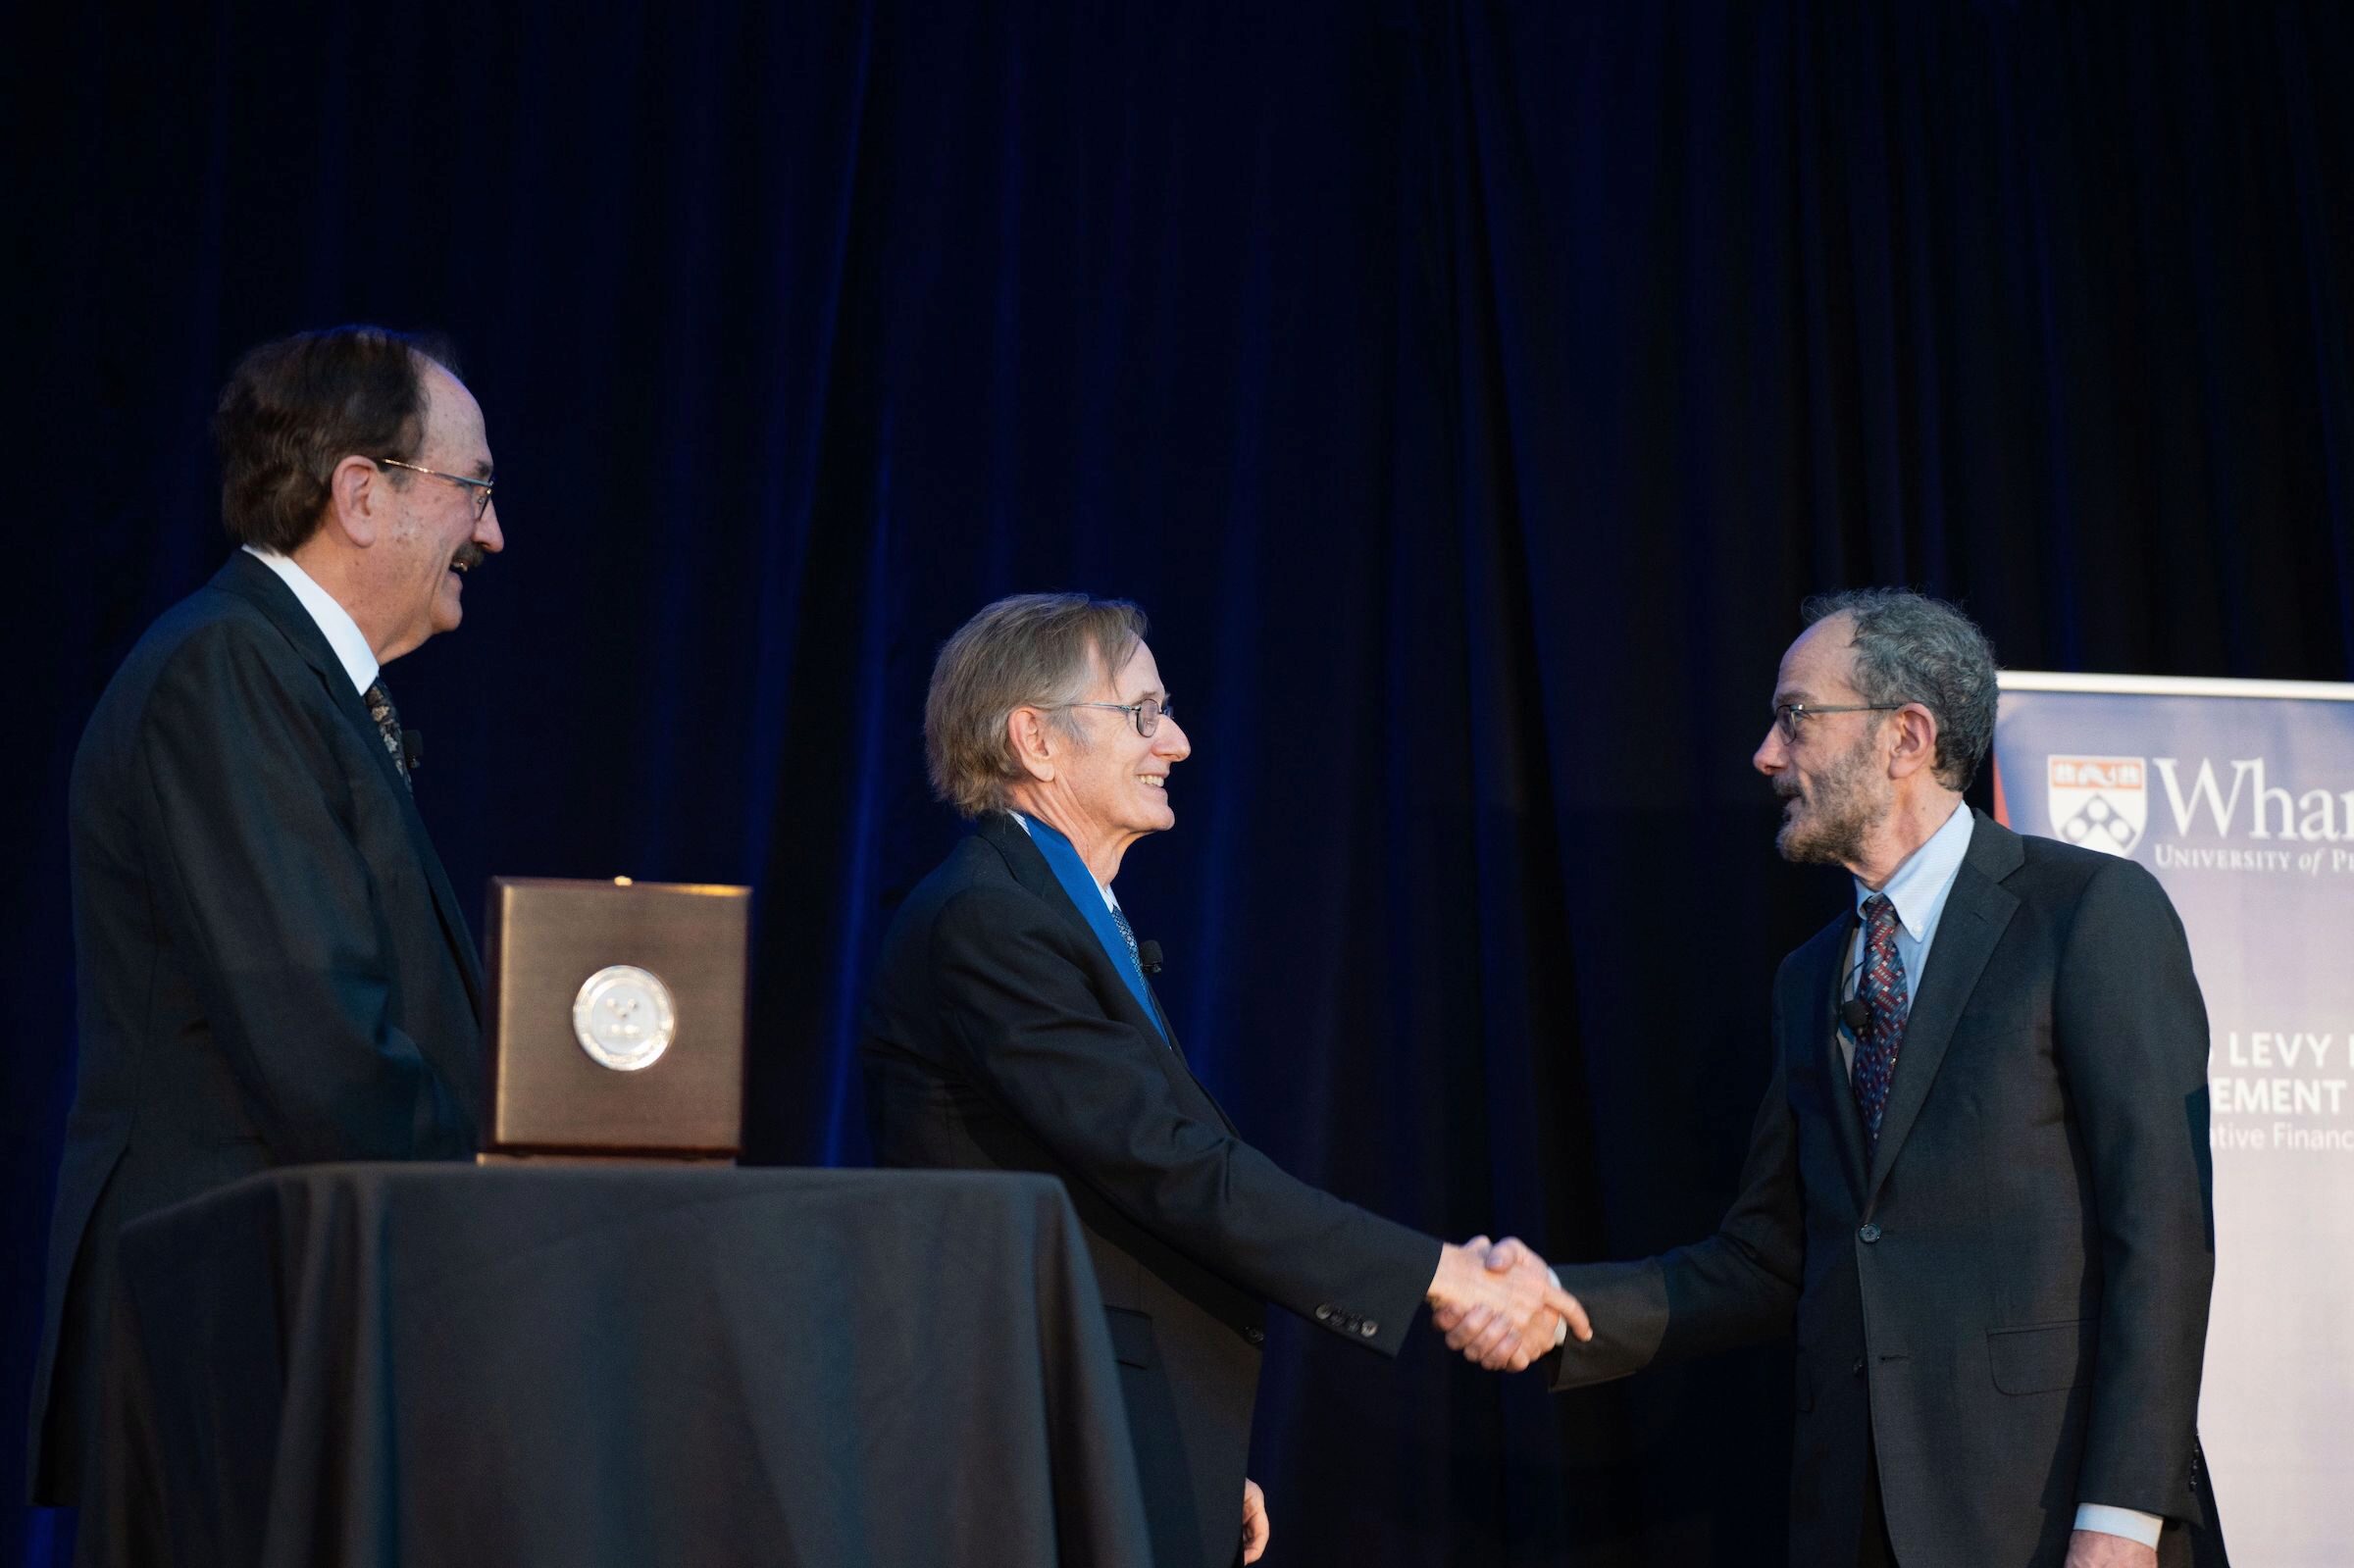 Albert S. “Pete” Kyle and Ken Levy shake hands as Bruce Jacobs watches with the Jacobs Levy Prize